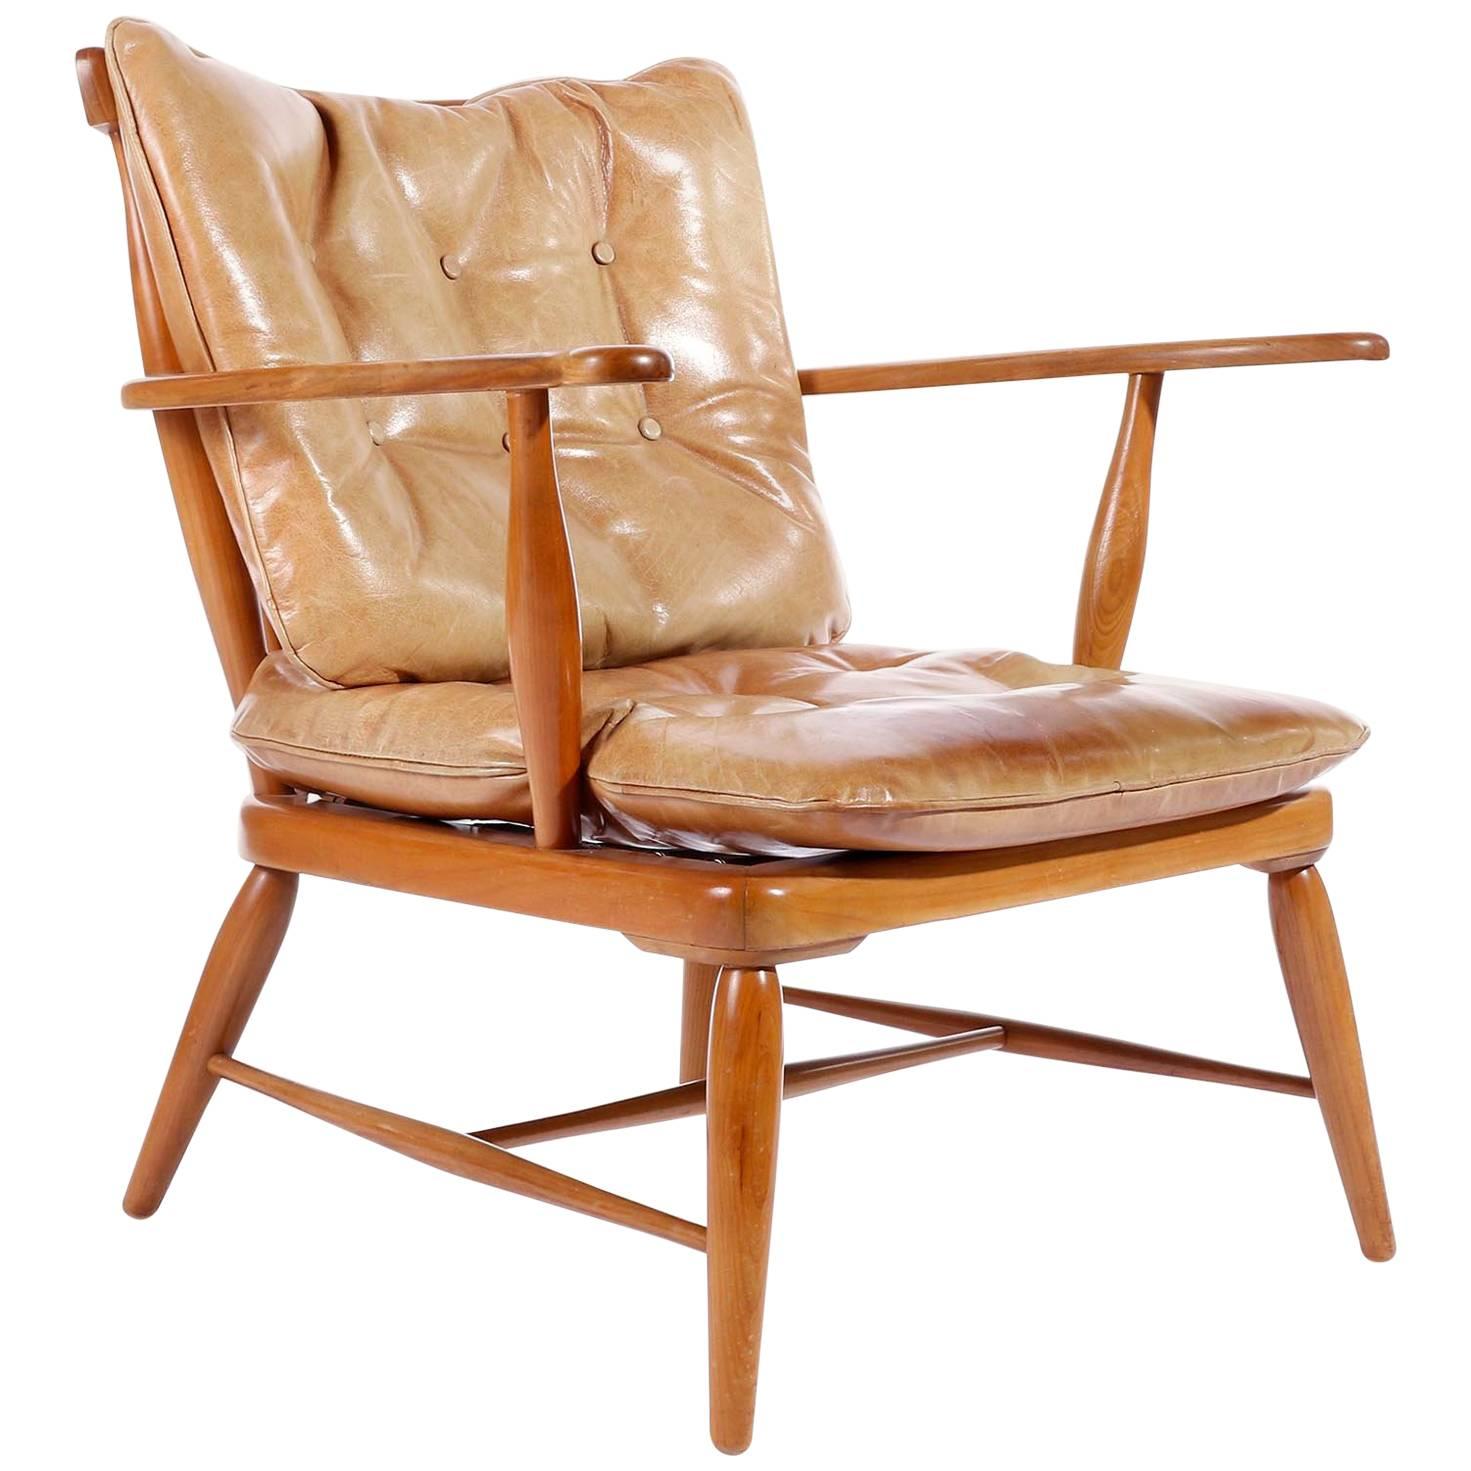 Mid-Century Modern, Arm Chair in Wood and Patinated Cognac Leather, 1950